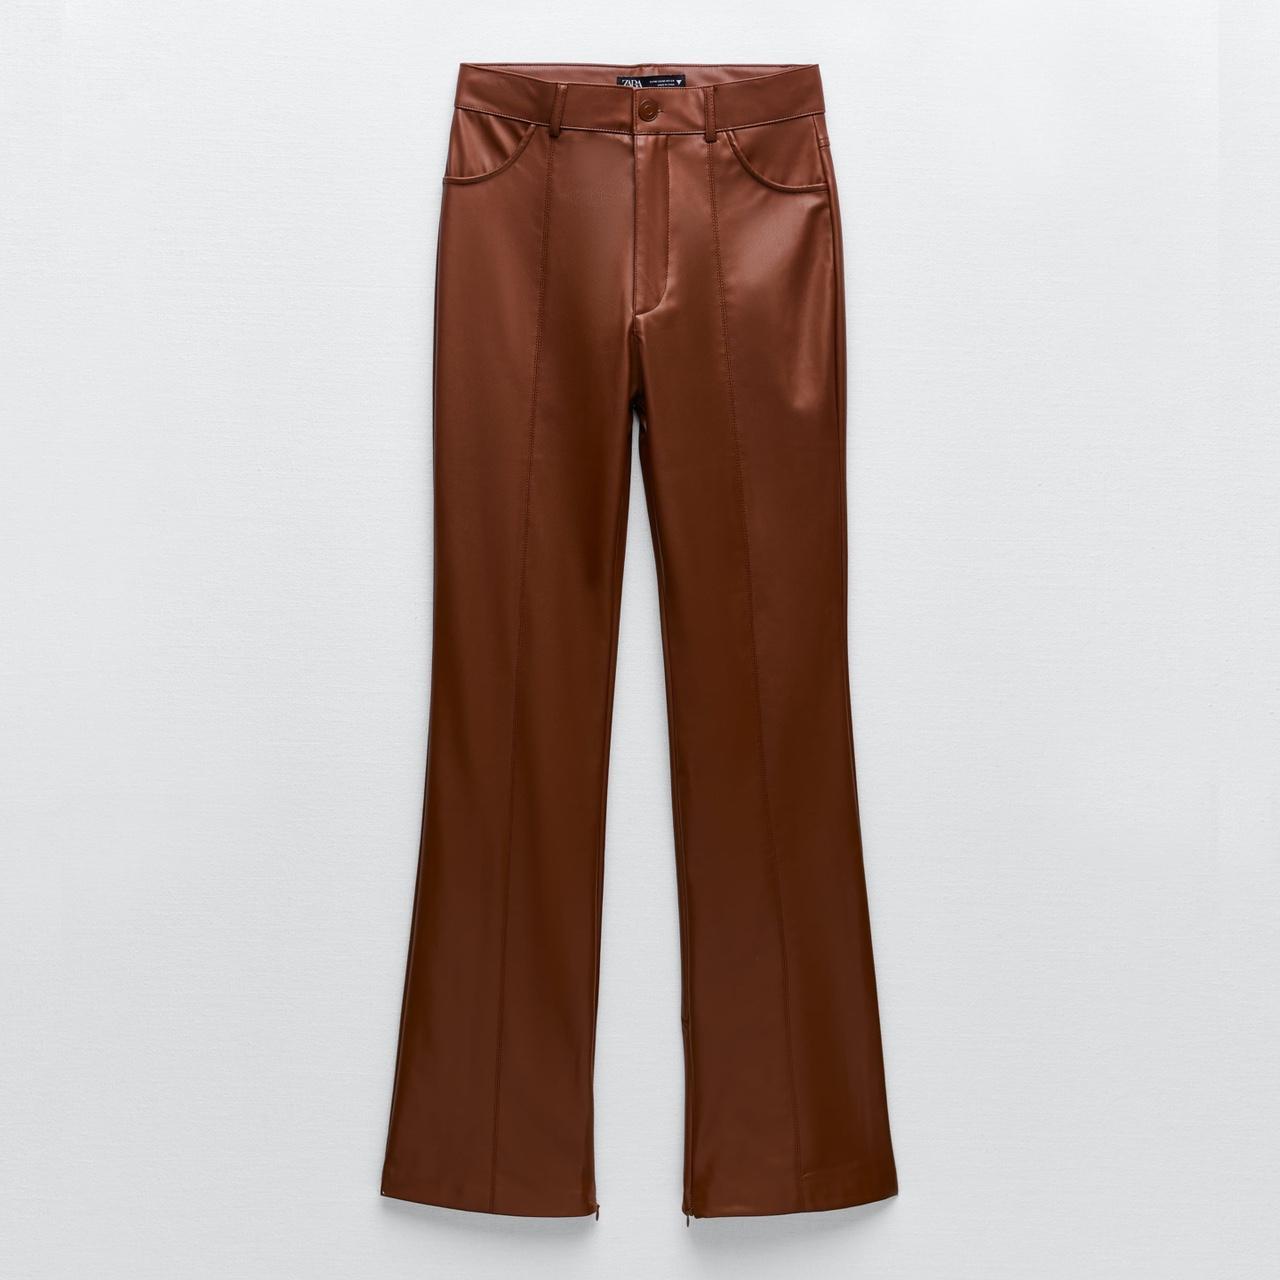 ZARA NWT FAUX LEATHER PANTS WITH SLIT - BROWN